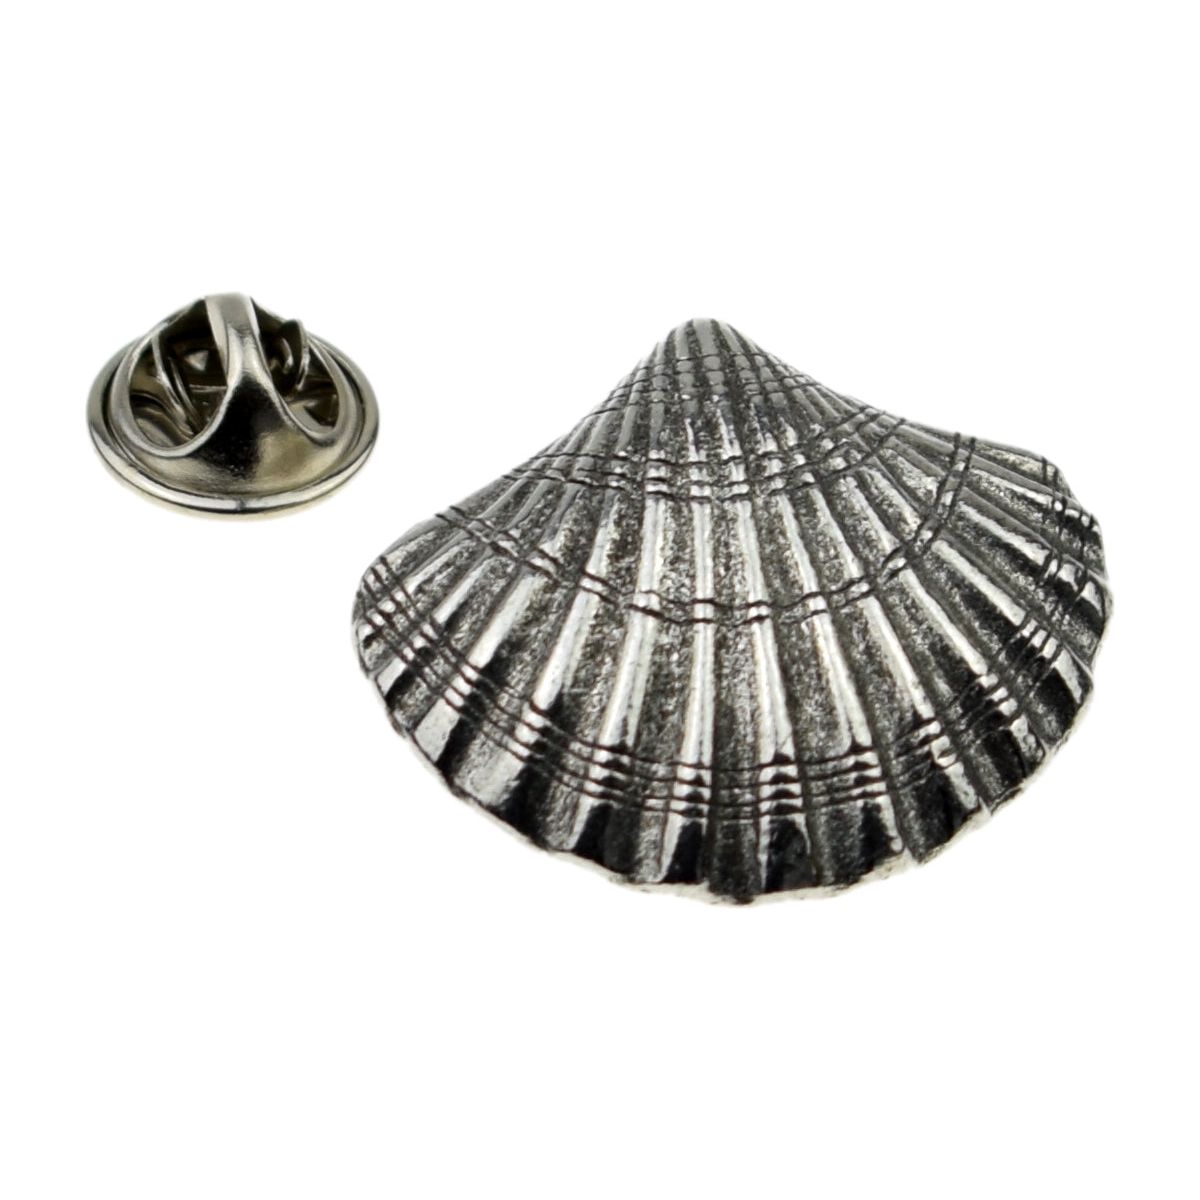 Scallop / Cockleshell Pewter Lapel Pin Badge - Ashton and Finch